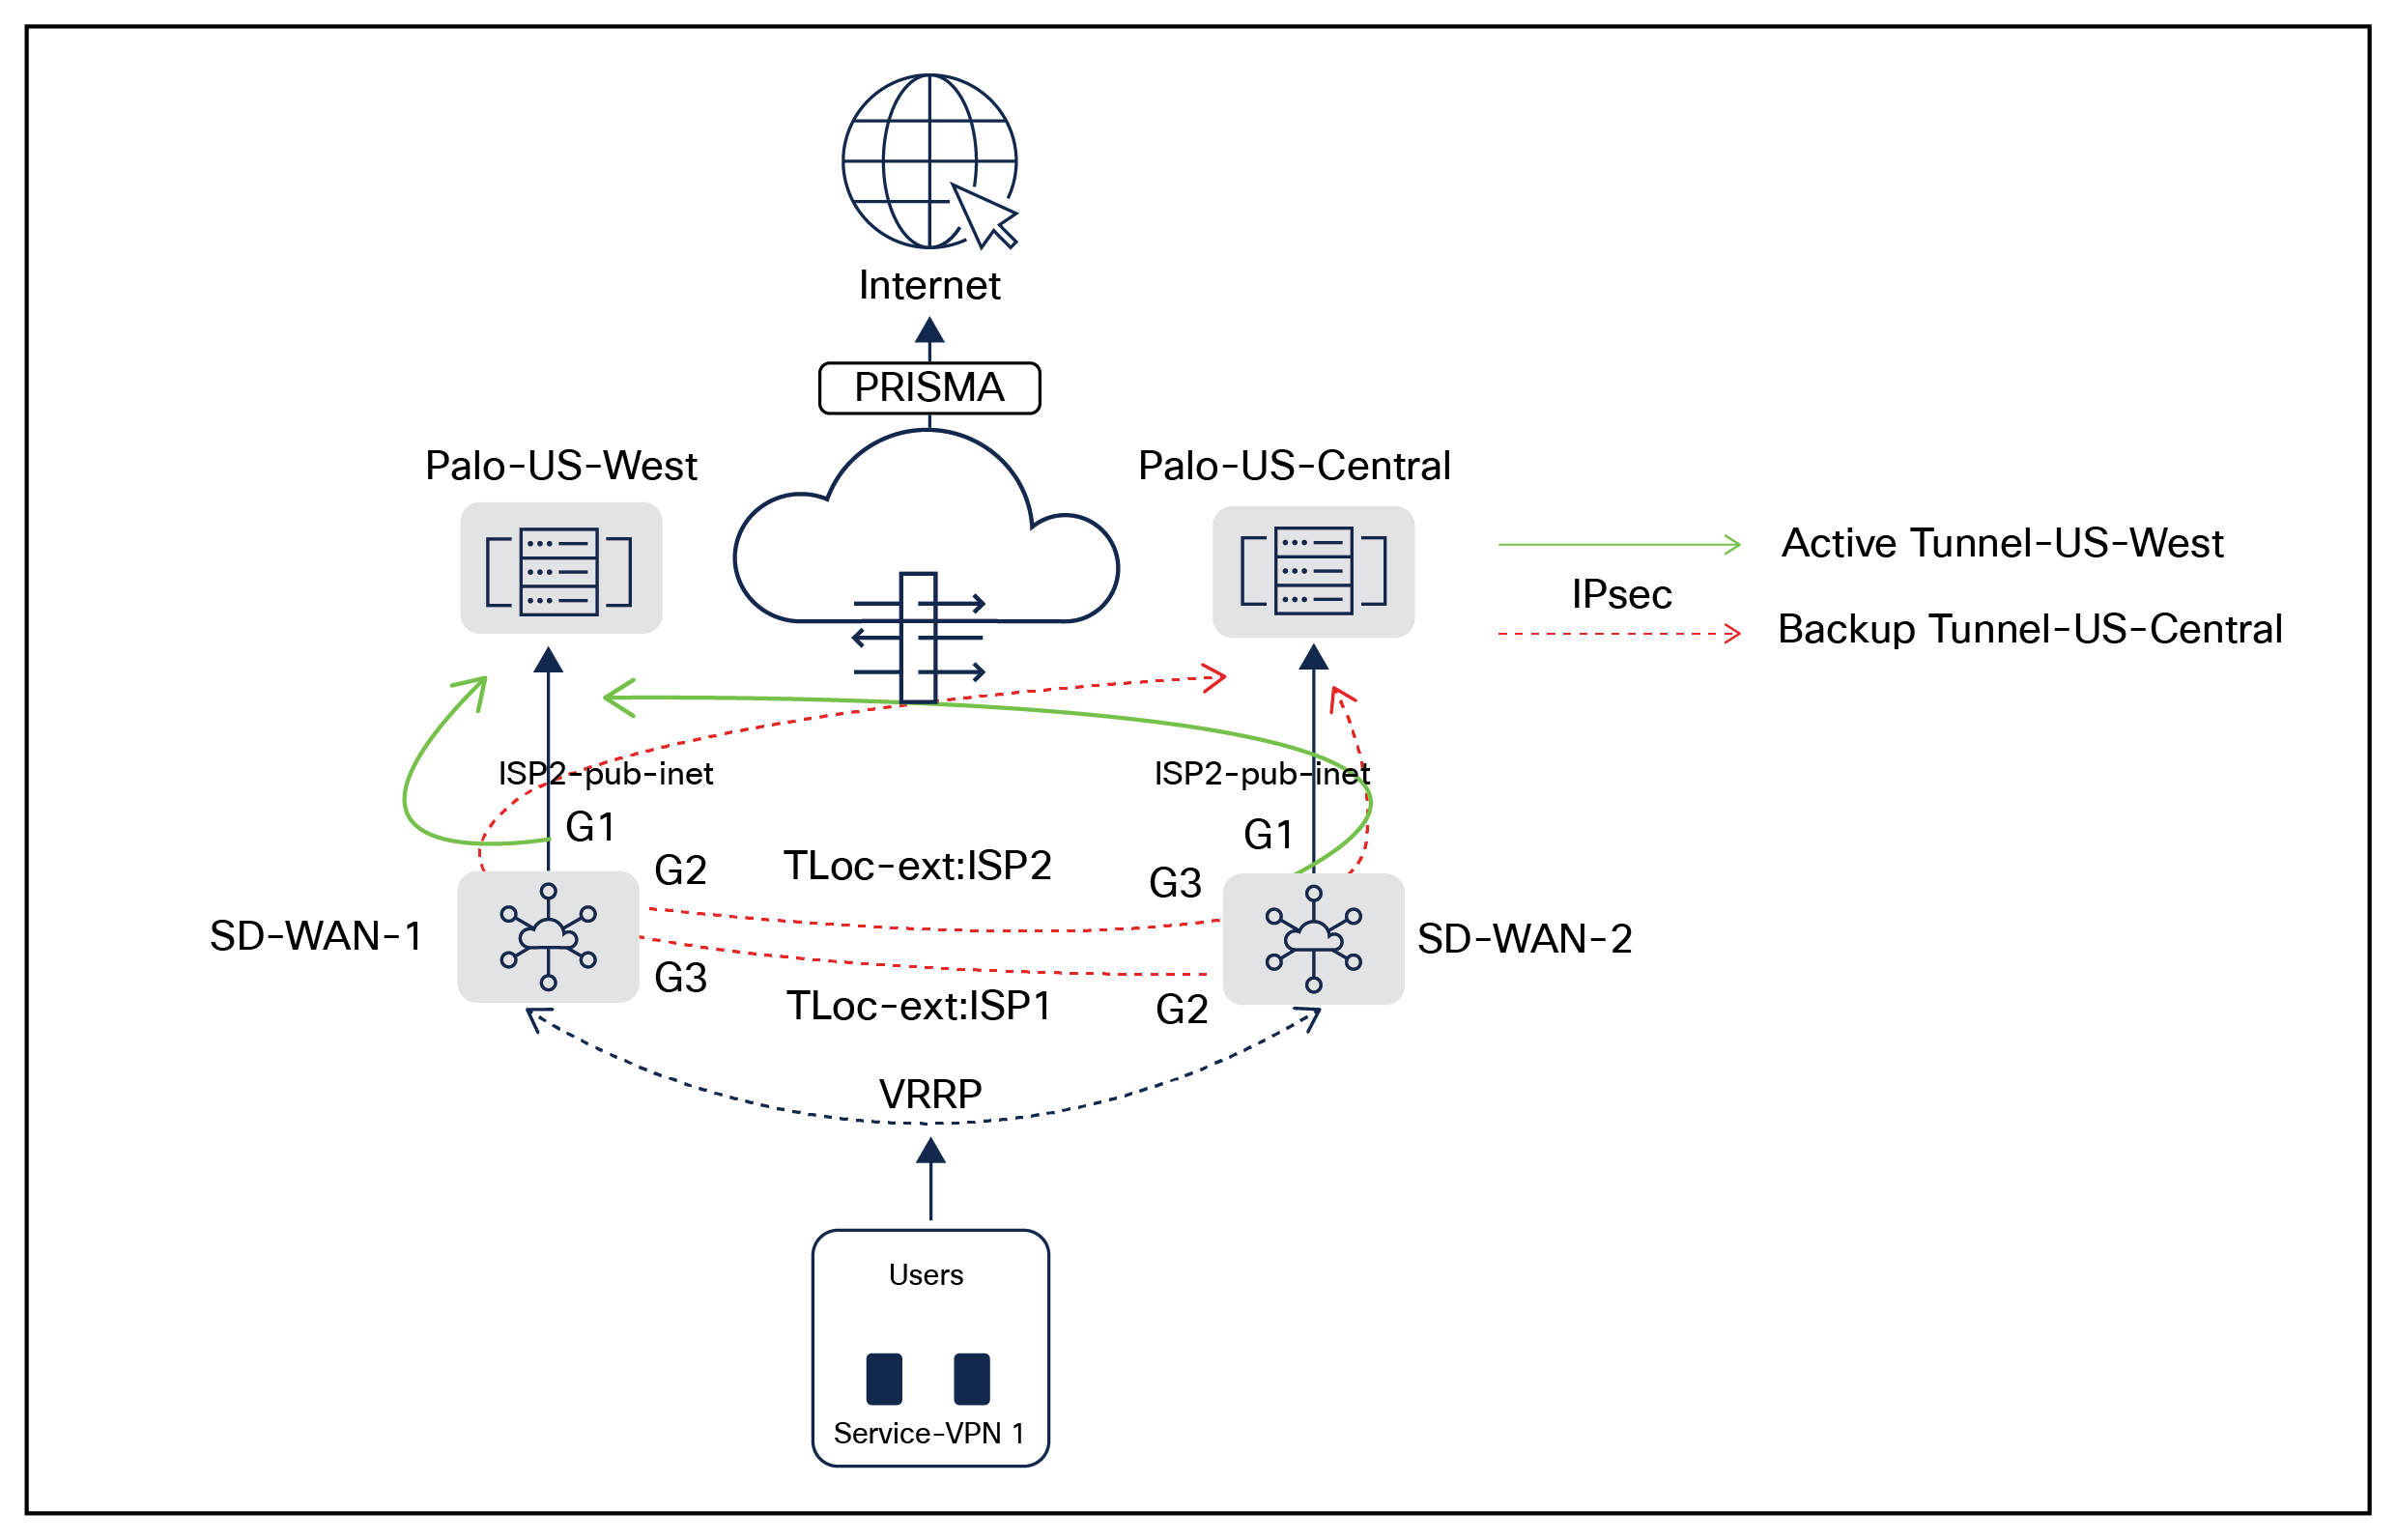 Cisco Catalyst SD-WAN dual-homed branch connectivity to multi-region Palo Alto Datacenters using redundant ISP Links